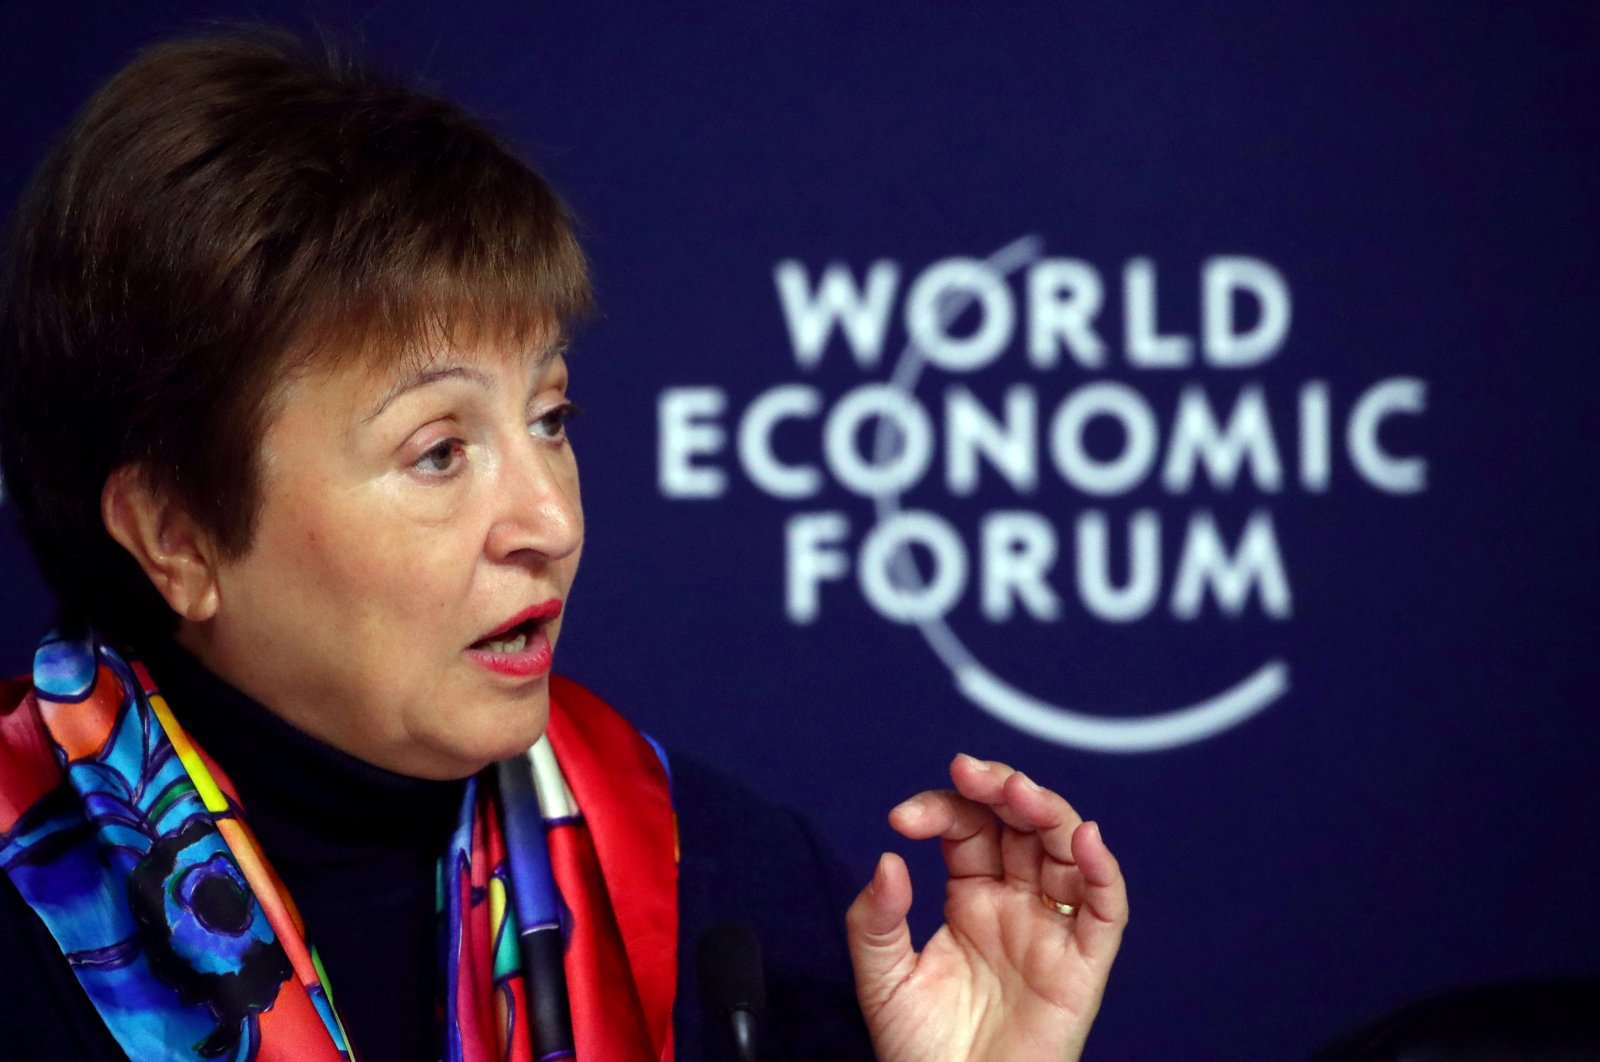 IMF Managing Director Kristalina Georgieva attends a news conference ahead of the World Economic Forum (WEF) in Davos, Switzerland January 20, 2020. (REUTERS Photo)